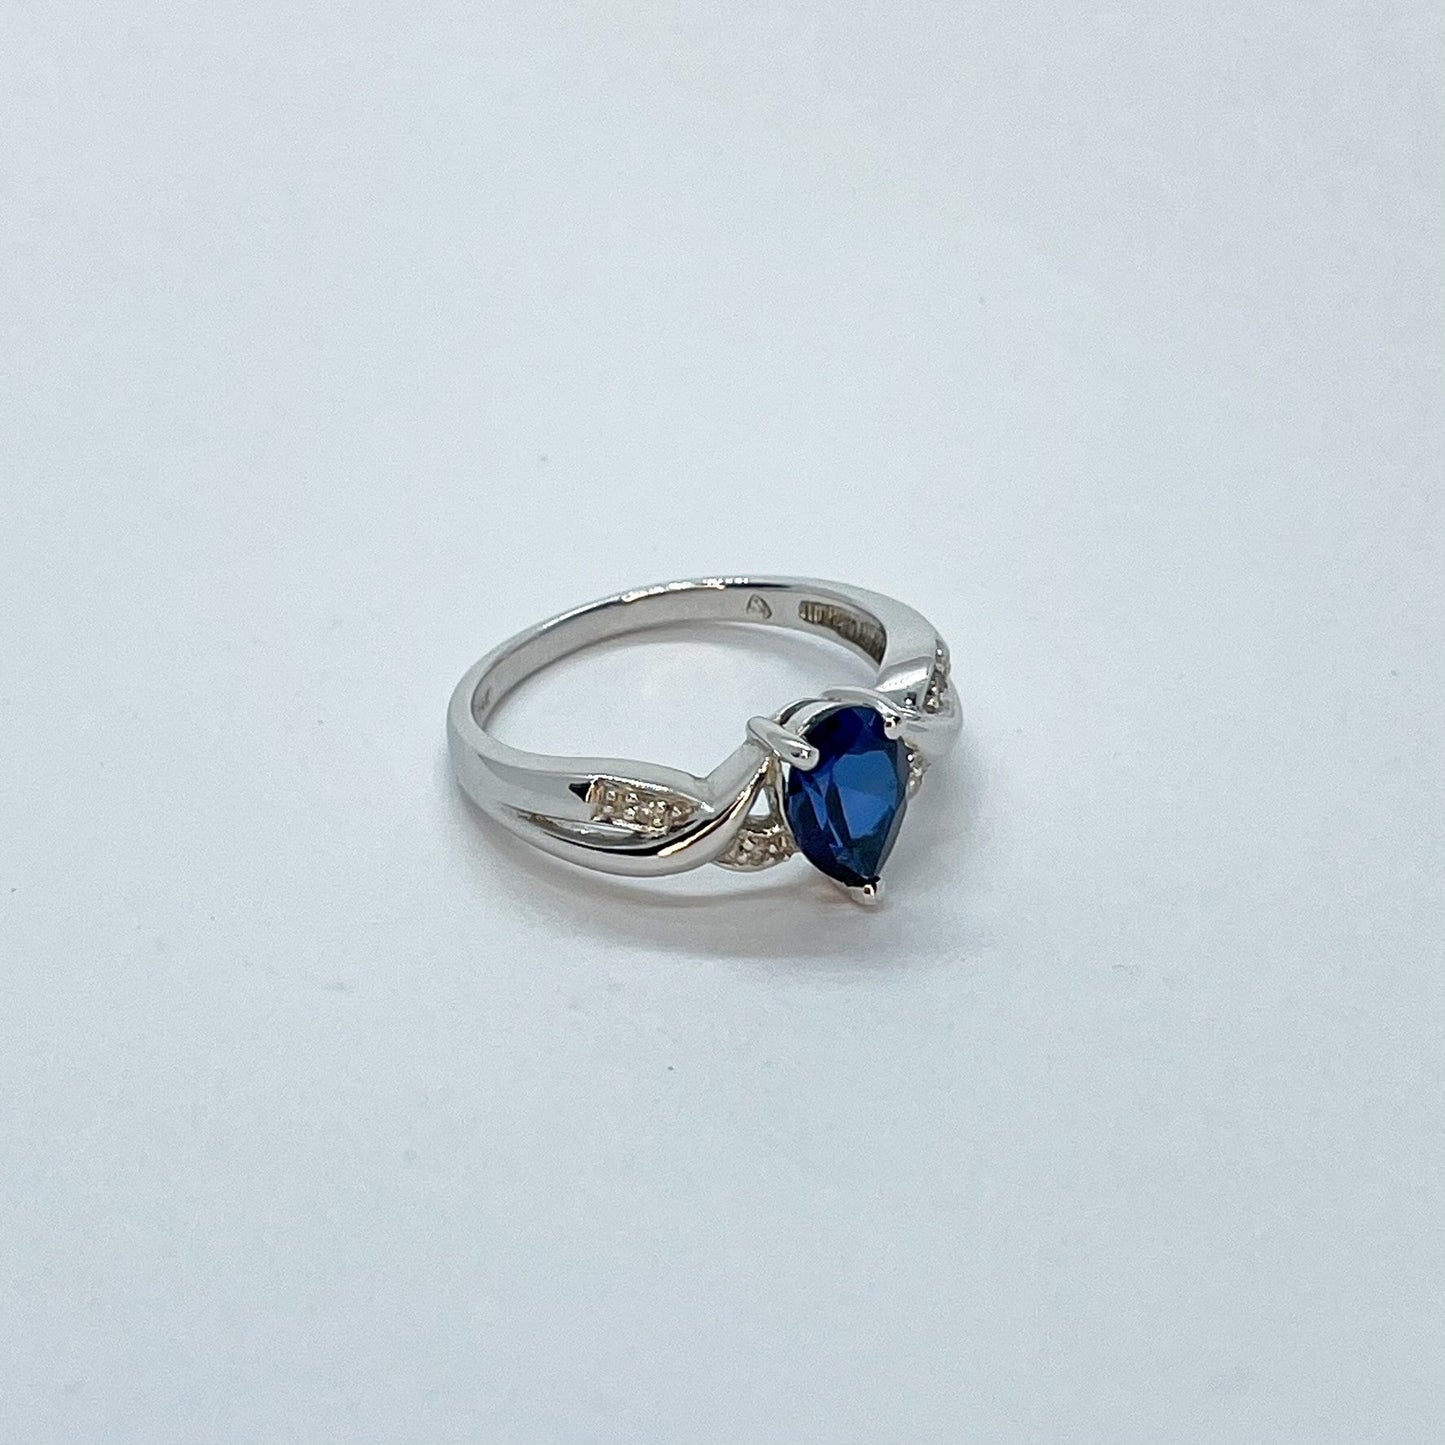 14K Pear Shaped Sapphire with Twist Band Details Ring